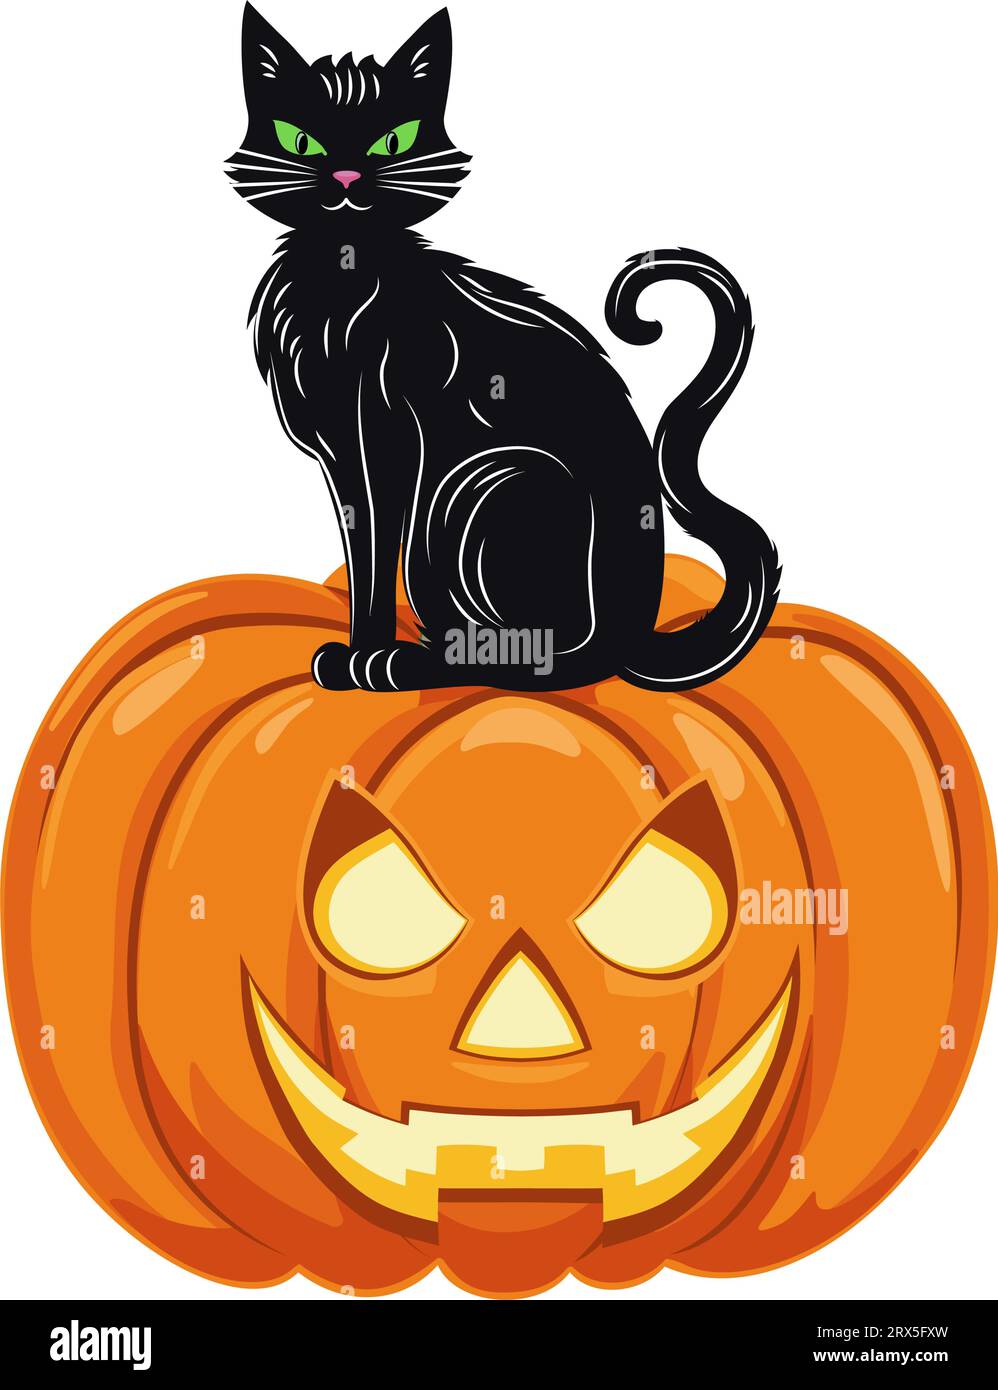 A black cat with green eyes sits on top of a jack o lantern. Cute animal and pumpkin. Traditional symbol and design element for Halloween celebration. Stock Vector